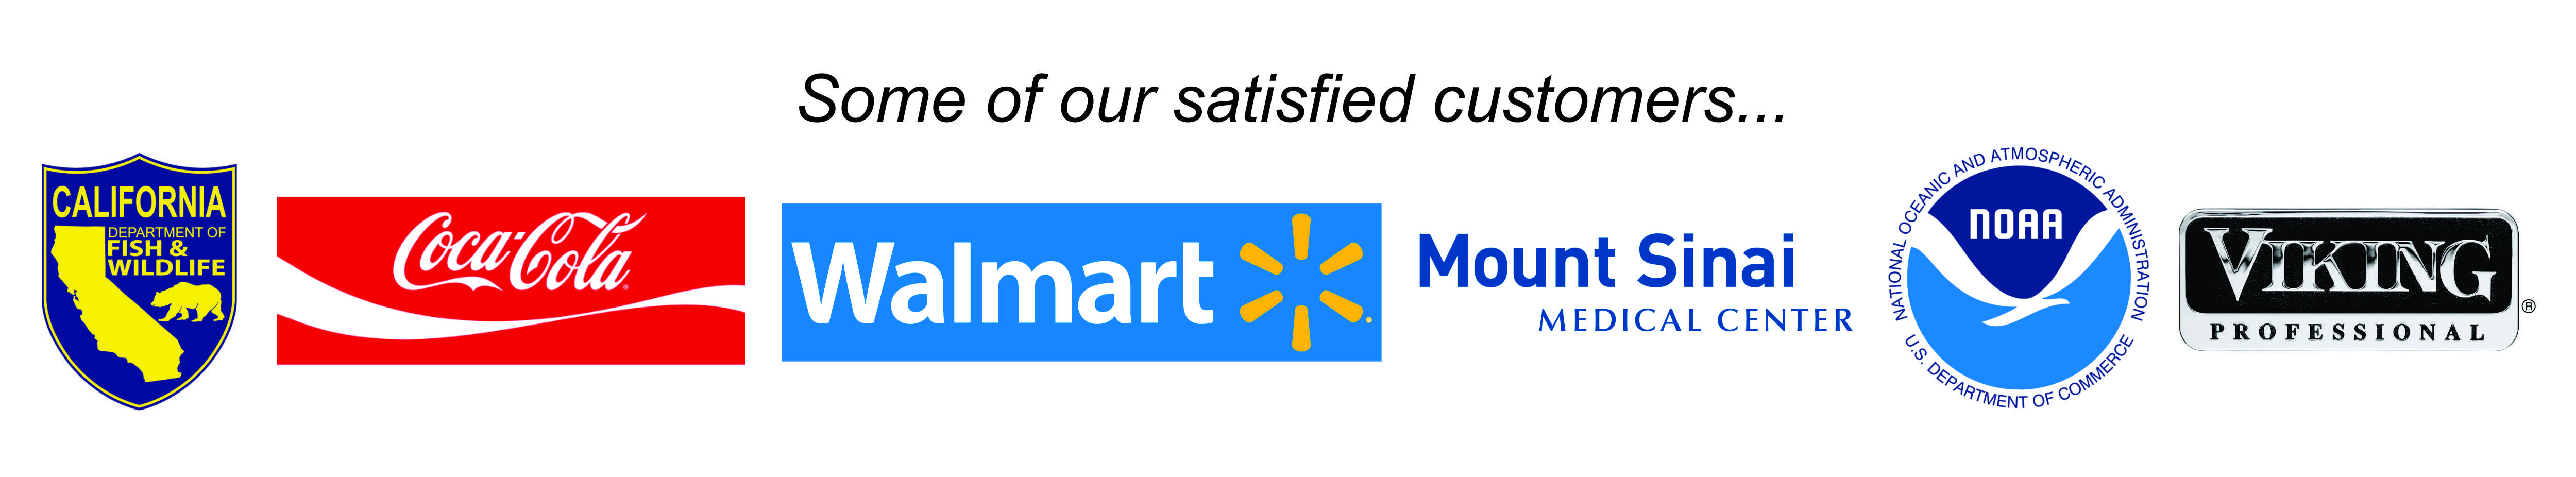 Some of our satisfied customers include WalMart, Coca-Cola, NOAA, Mount Sinai medical center, California Fish & Wildlife, and Viking Range